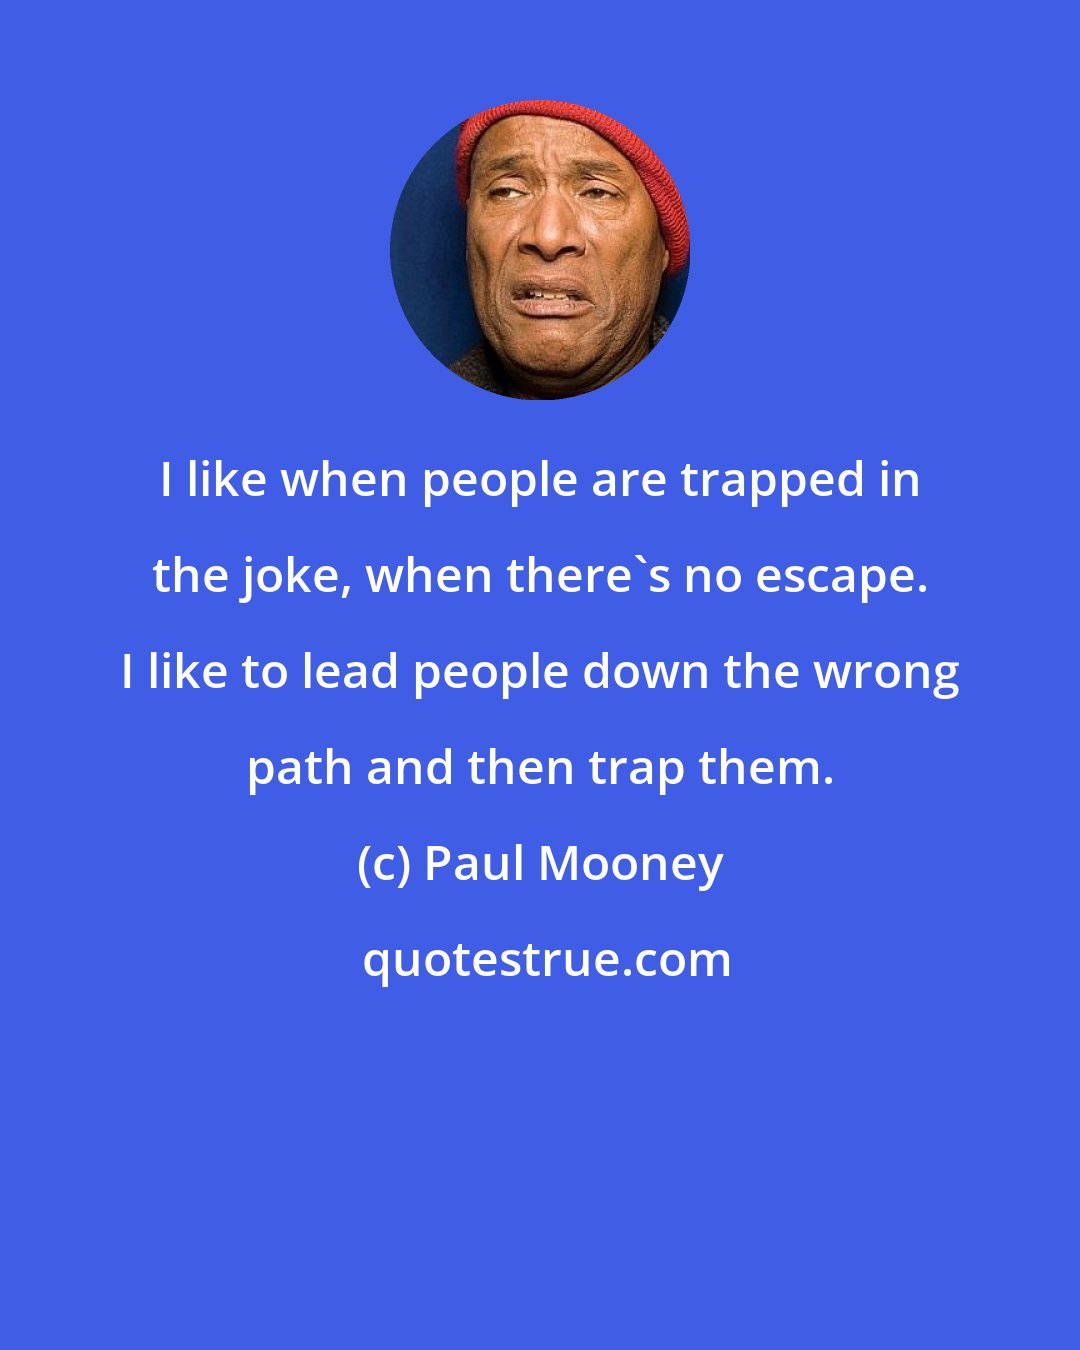 Paul Mooney: I like when people are trapped in the joke, when there's no escape. I like to lead people down the wrong path and then trap them.